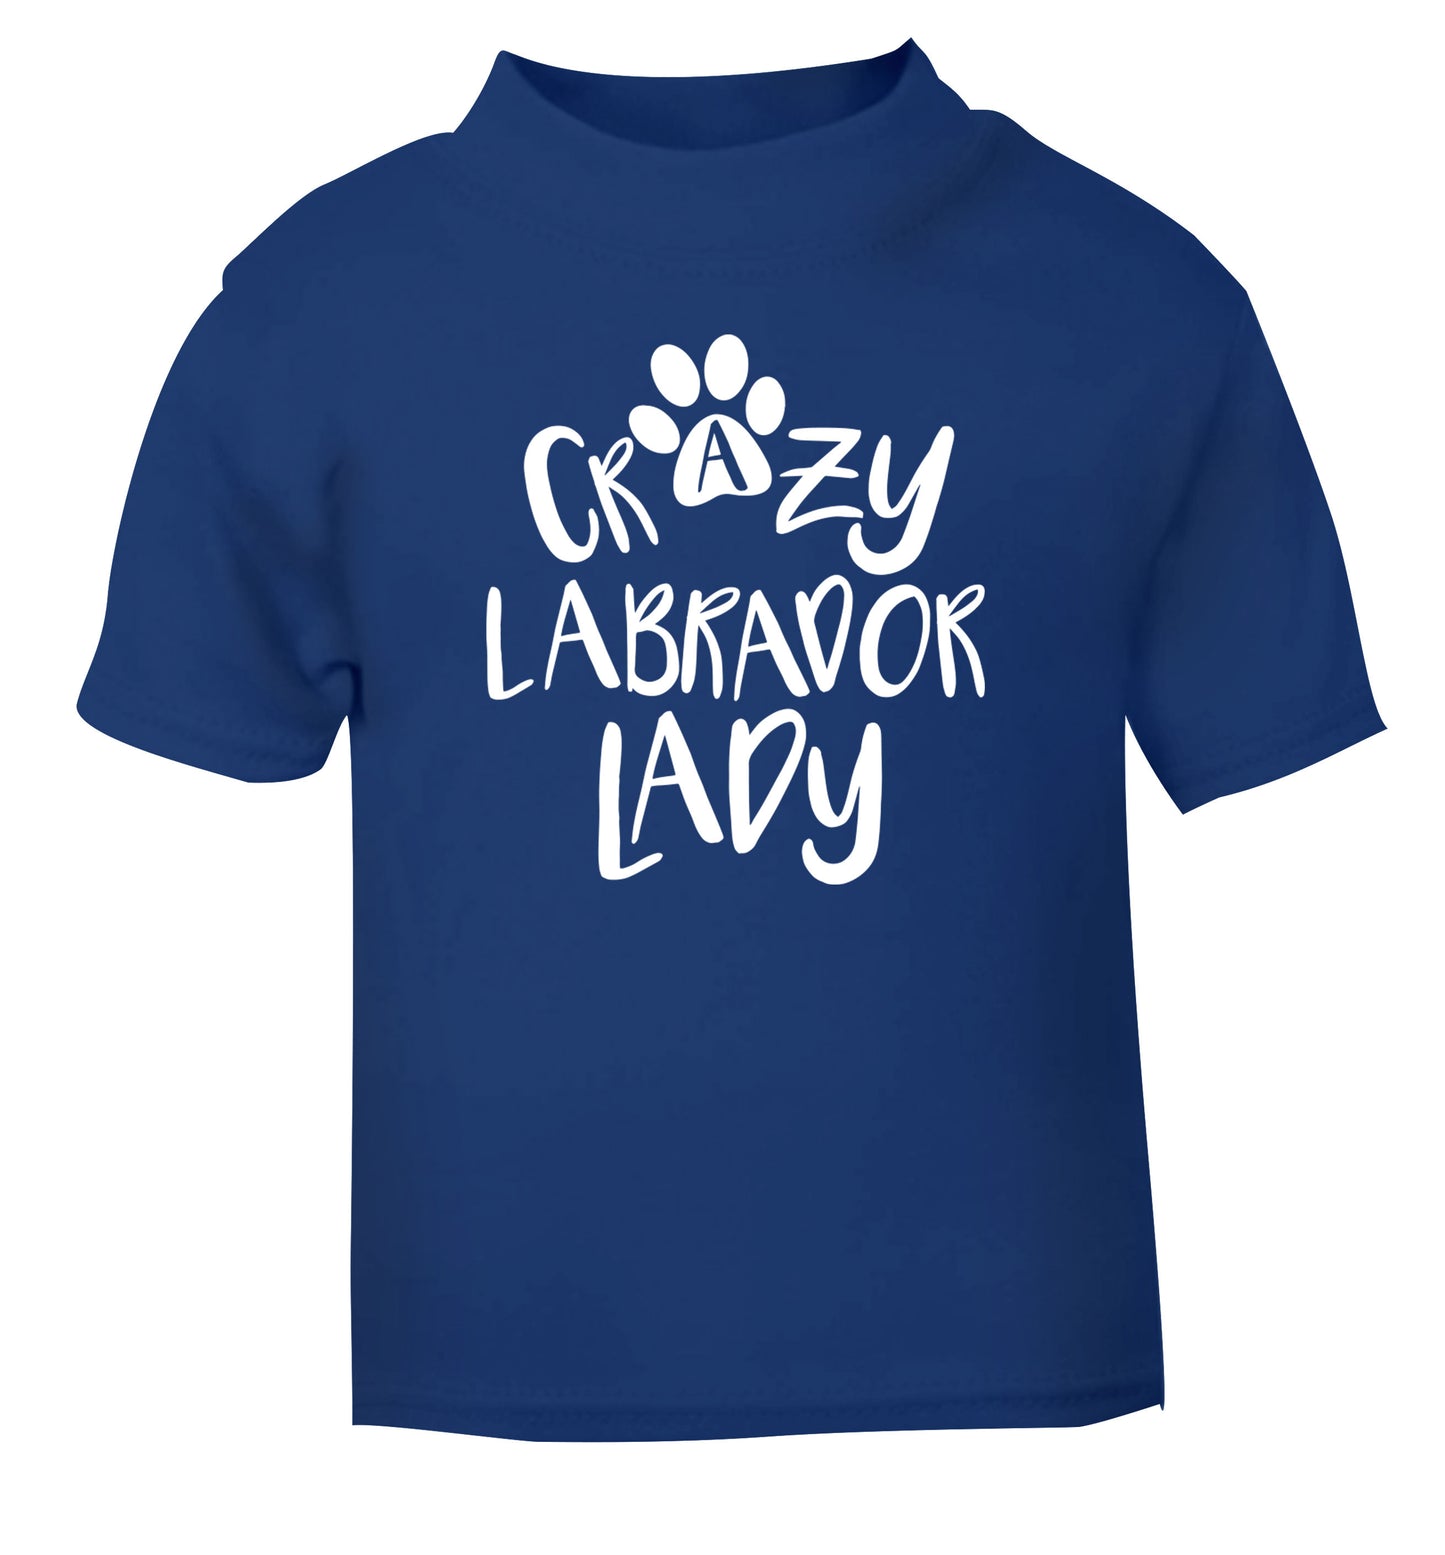 Crazy labrador lady blue Baby Toddler Tshirt 2 Years